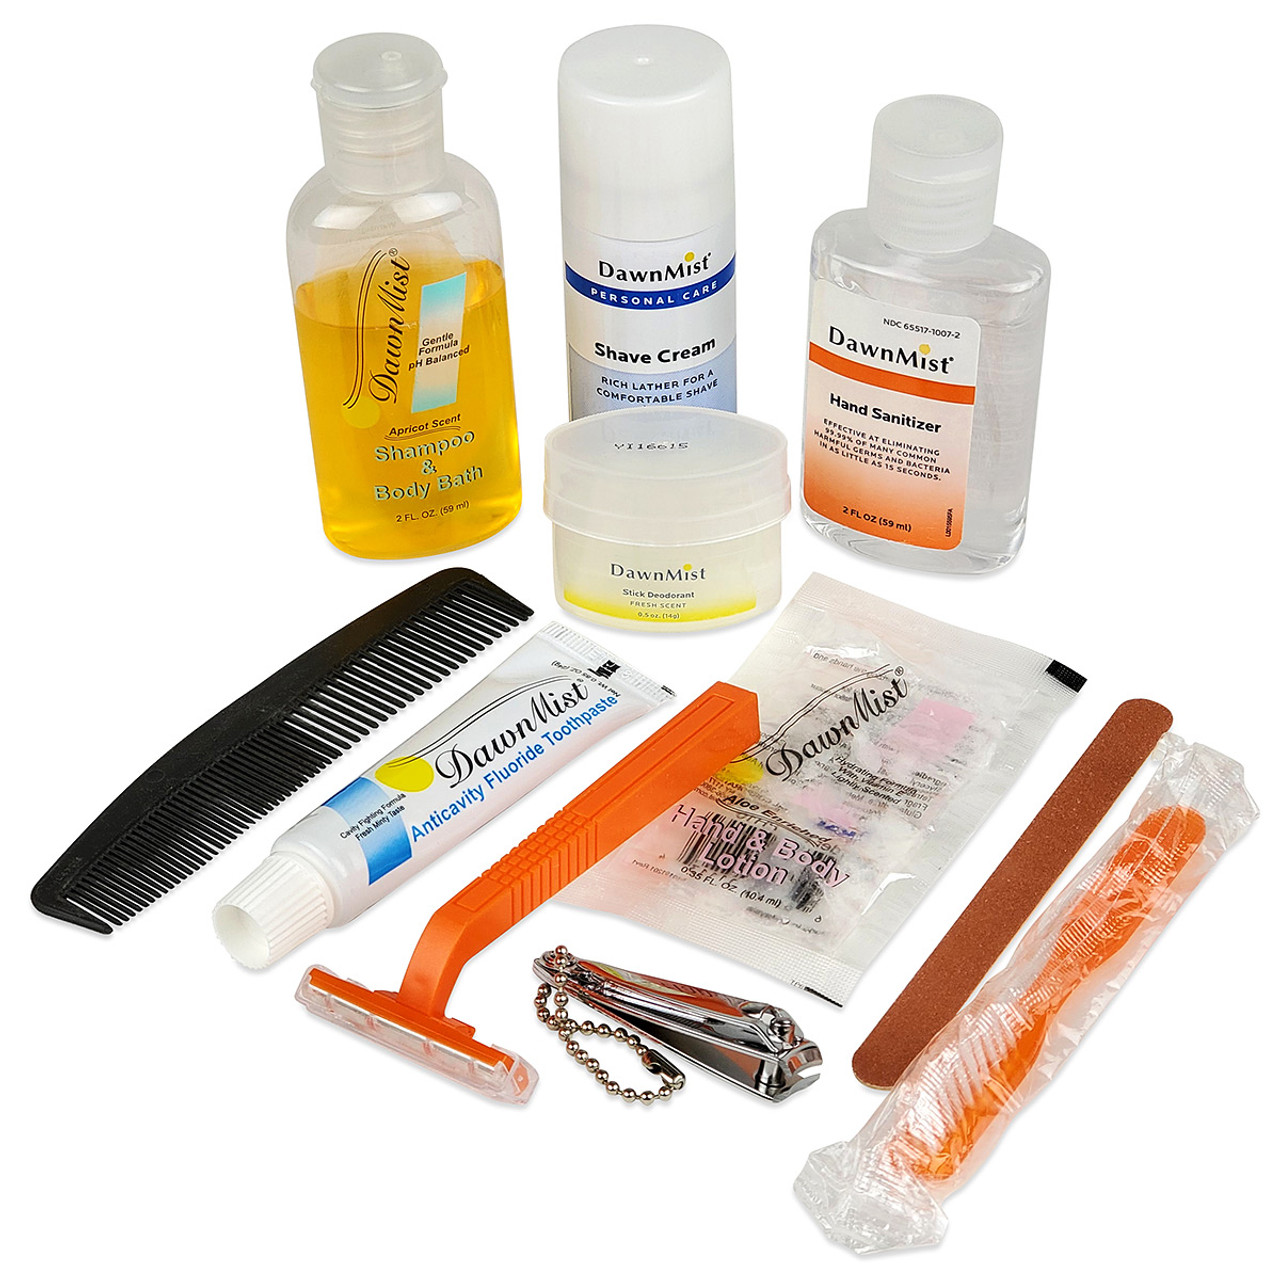 Hygiene Kits: Top 7 Most Common